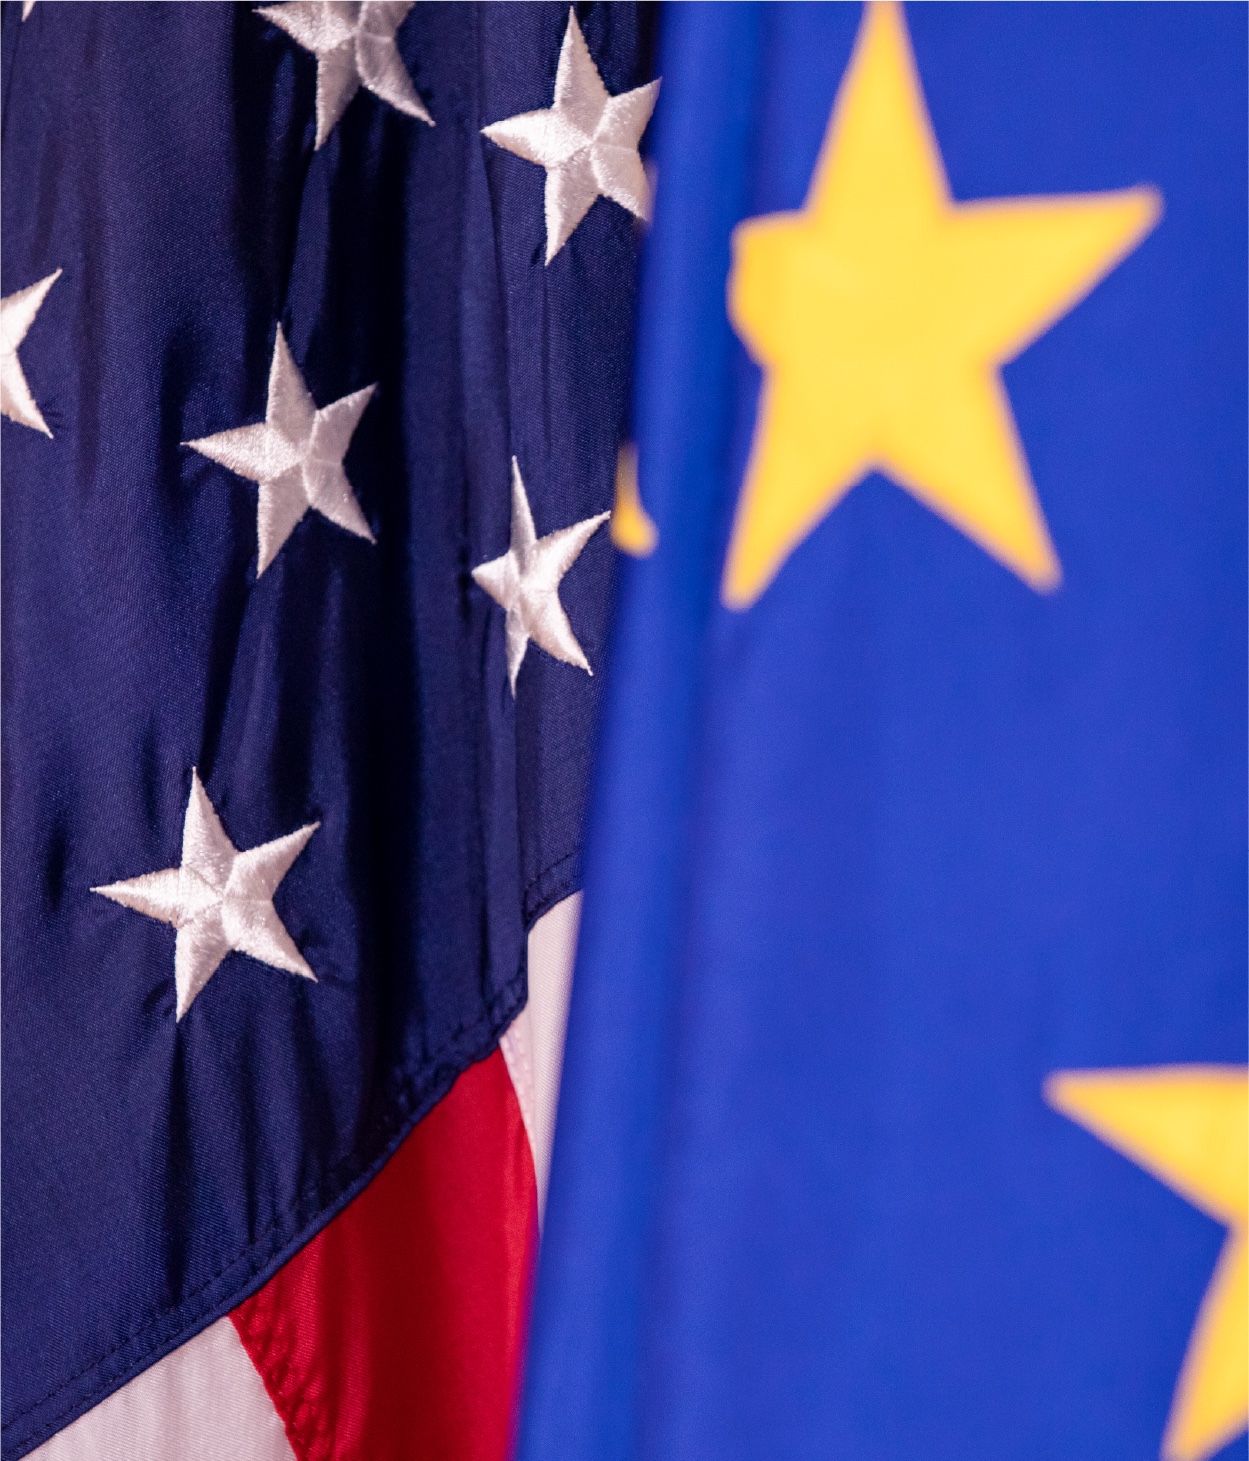 Close-up photo of the US and EU flags